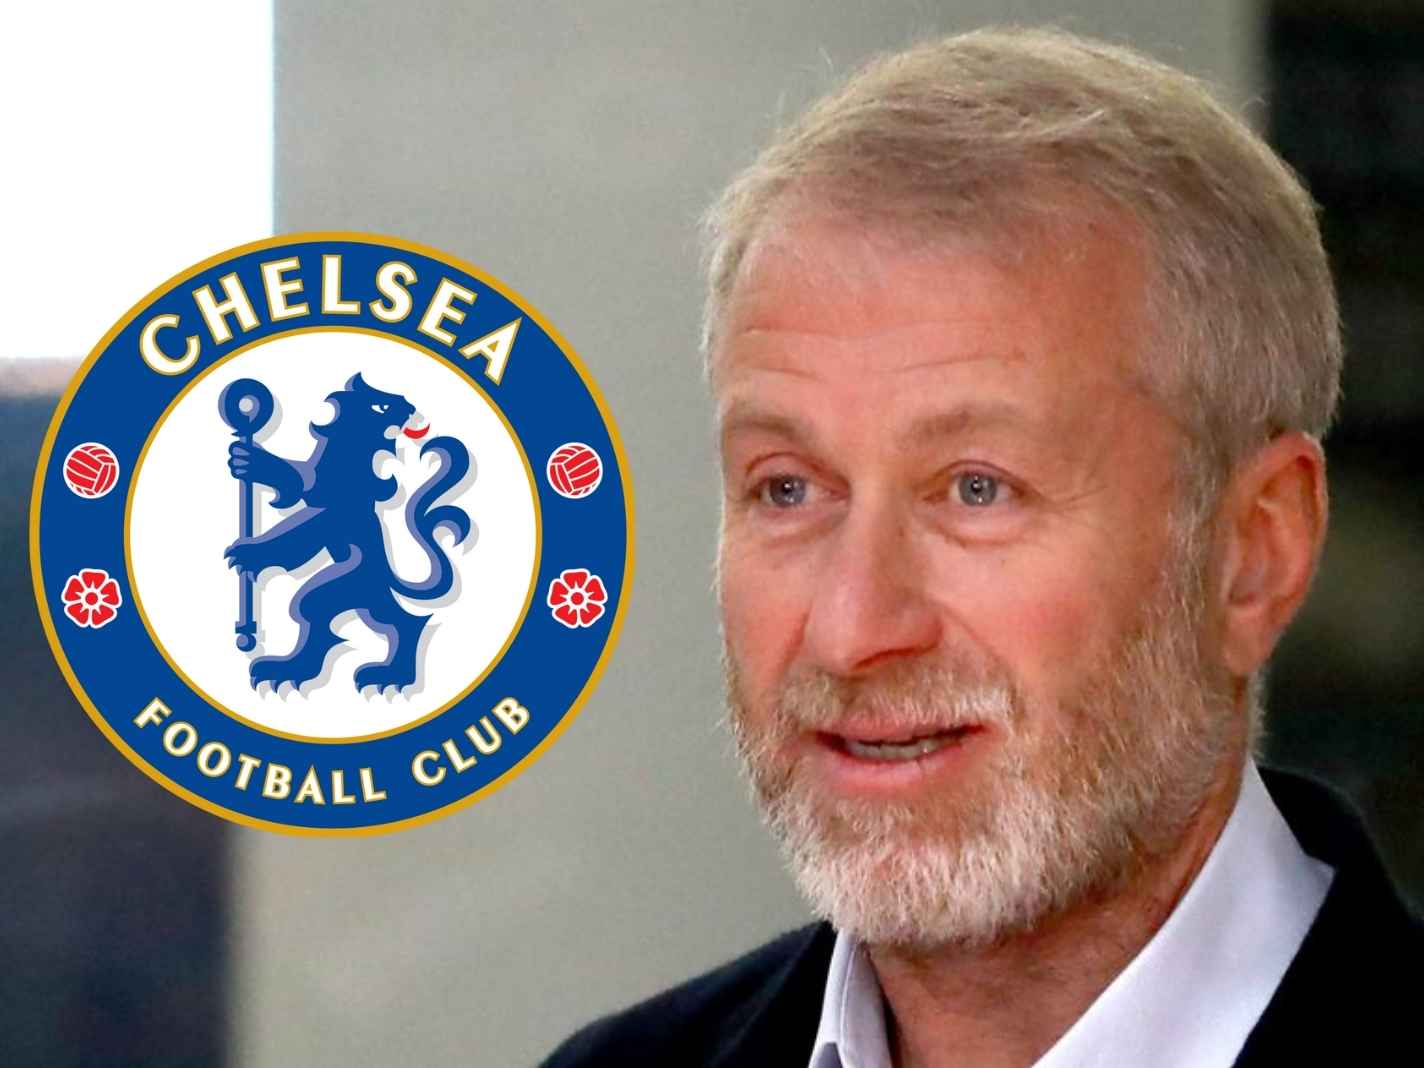 7 ways fans reacted to UK sanctions on Chelsea owner Roman Abramovich